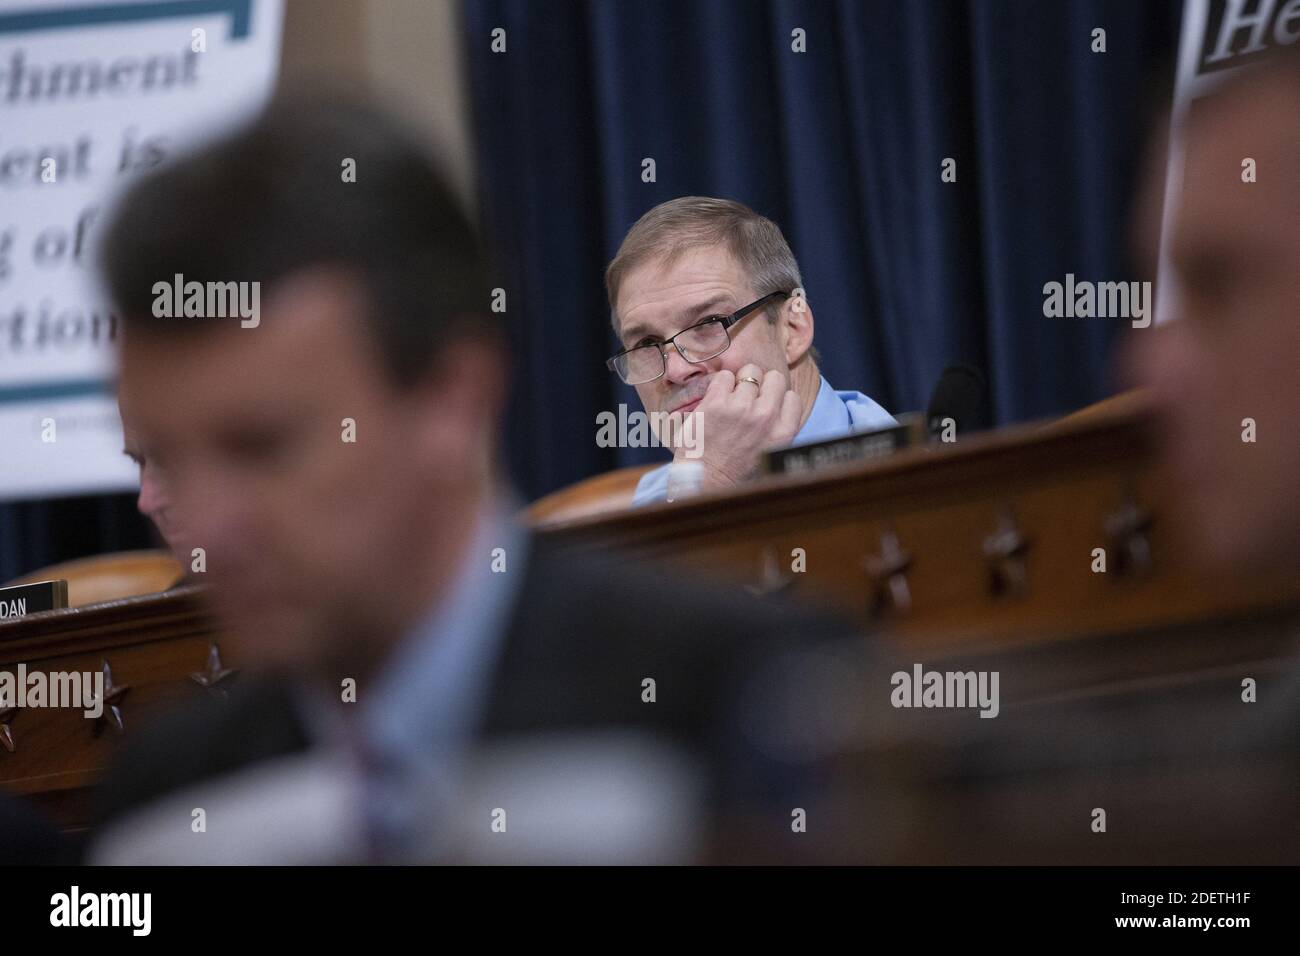 United States Representative Jim Jordan (Republican of Ohio) listens during the United States House Committee on the Judiciary hearing with constitutional law experts Noah Feldman, of Harvard University, Pamela Karlan, of Stanford University, Michael Gerhardt, of the University of North Carolina, and Jonathan Turley of The George Washington University Law School on Capitol Hill in Washington, DC, USA on Wednesday, December 4, 2019. Photo by Stefani Reynolds/CNP/ABACAPRESS.COM Stock Photo